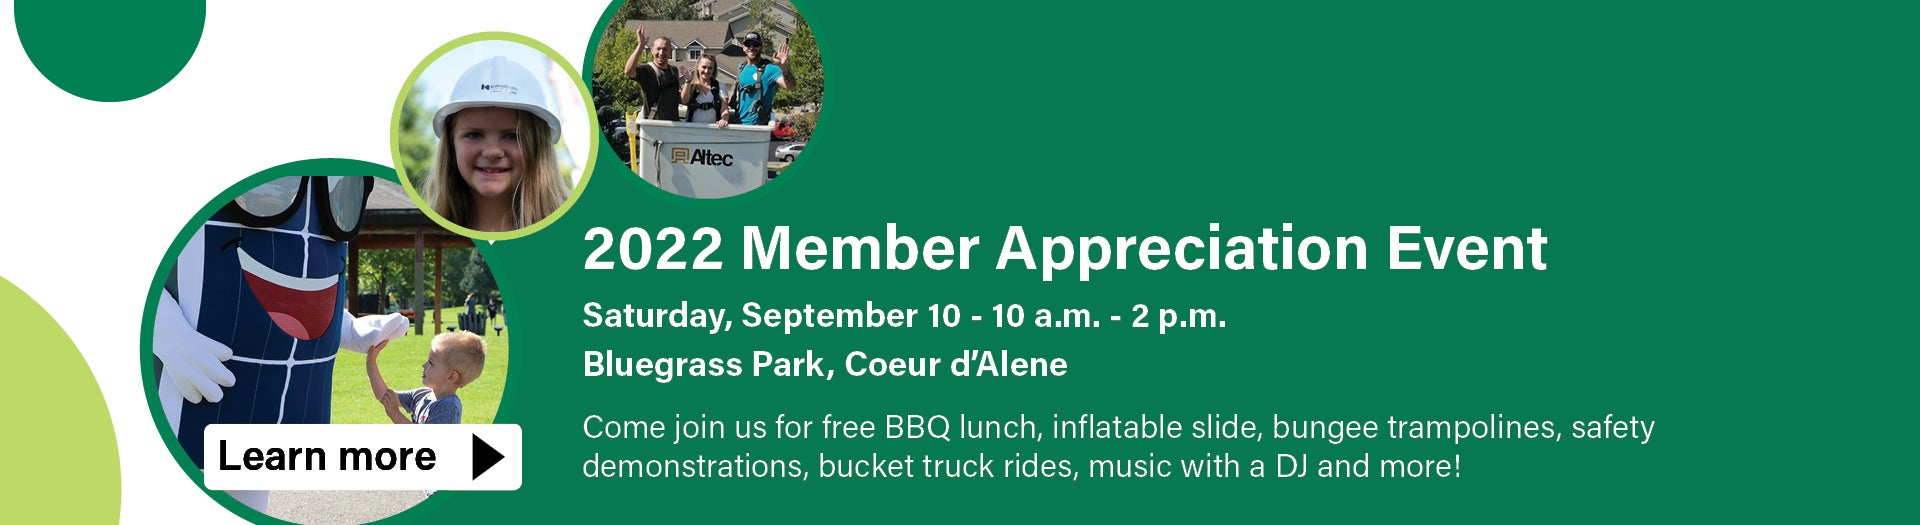 2022 Member Appreciation Event  Saturday, September 10 - 10 a.m. - 2 p.m. Bluegrass Park, Coeur d’Alene  Come join us for free BBQ lunch, inflatable slide, bungee trampolines, safety  demonstrations, bucket truck rides, music with a DJ and more! 